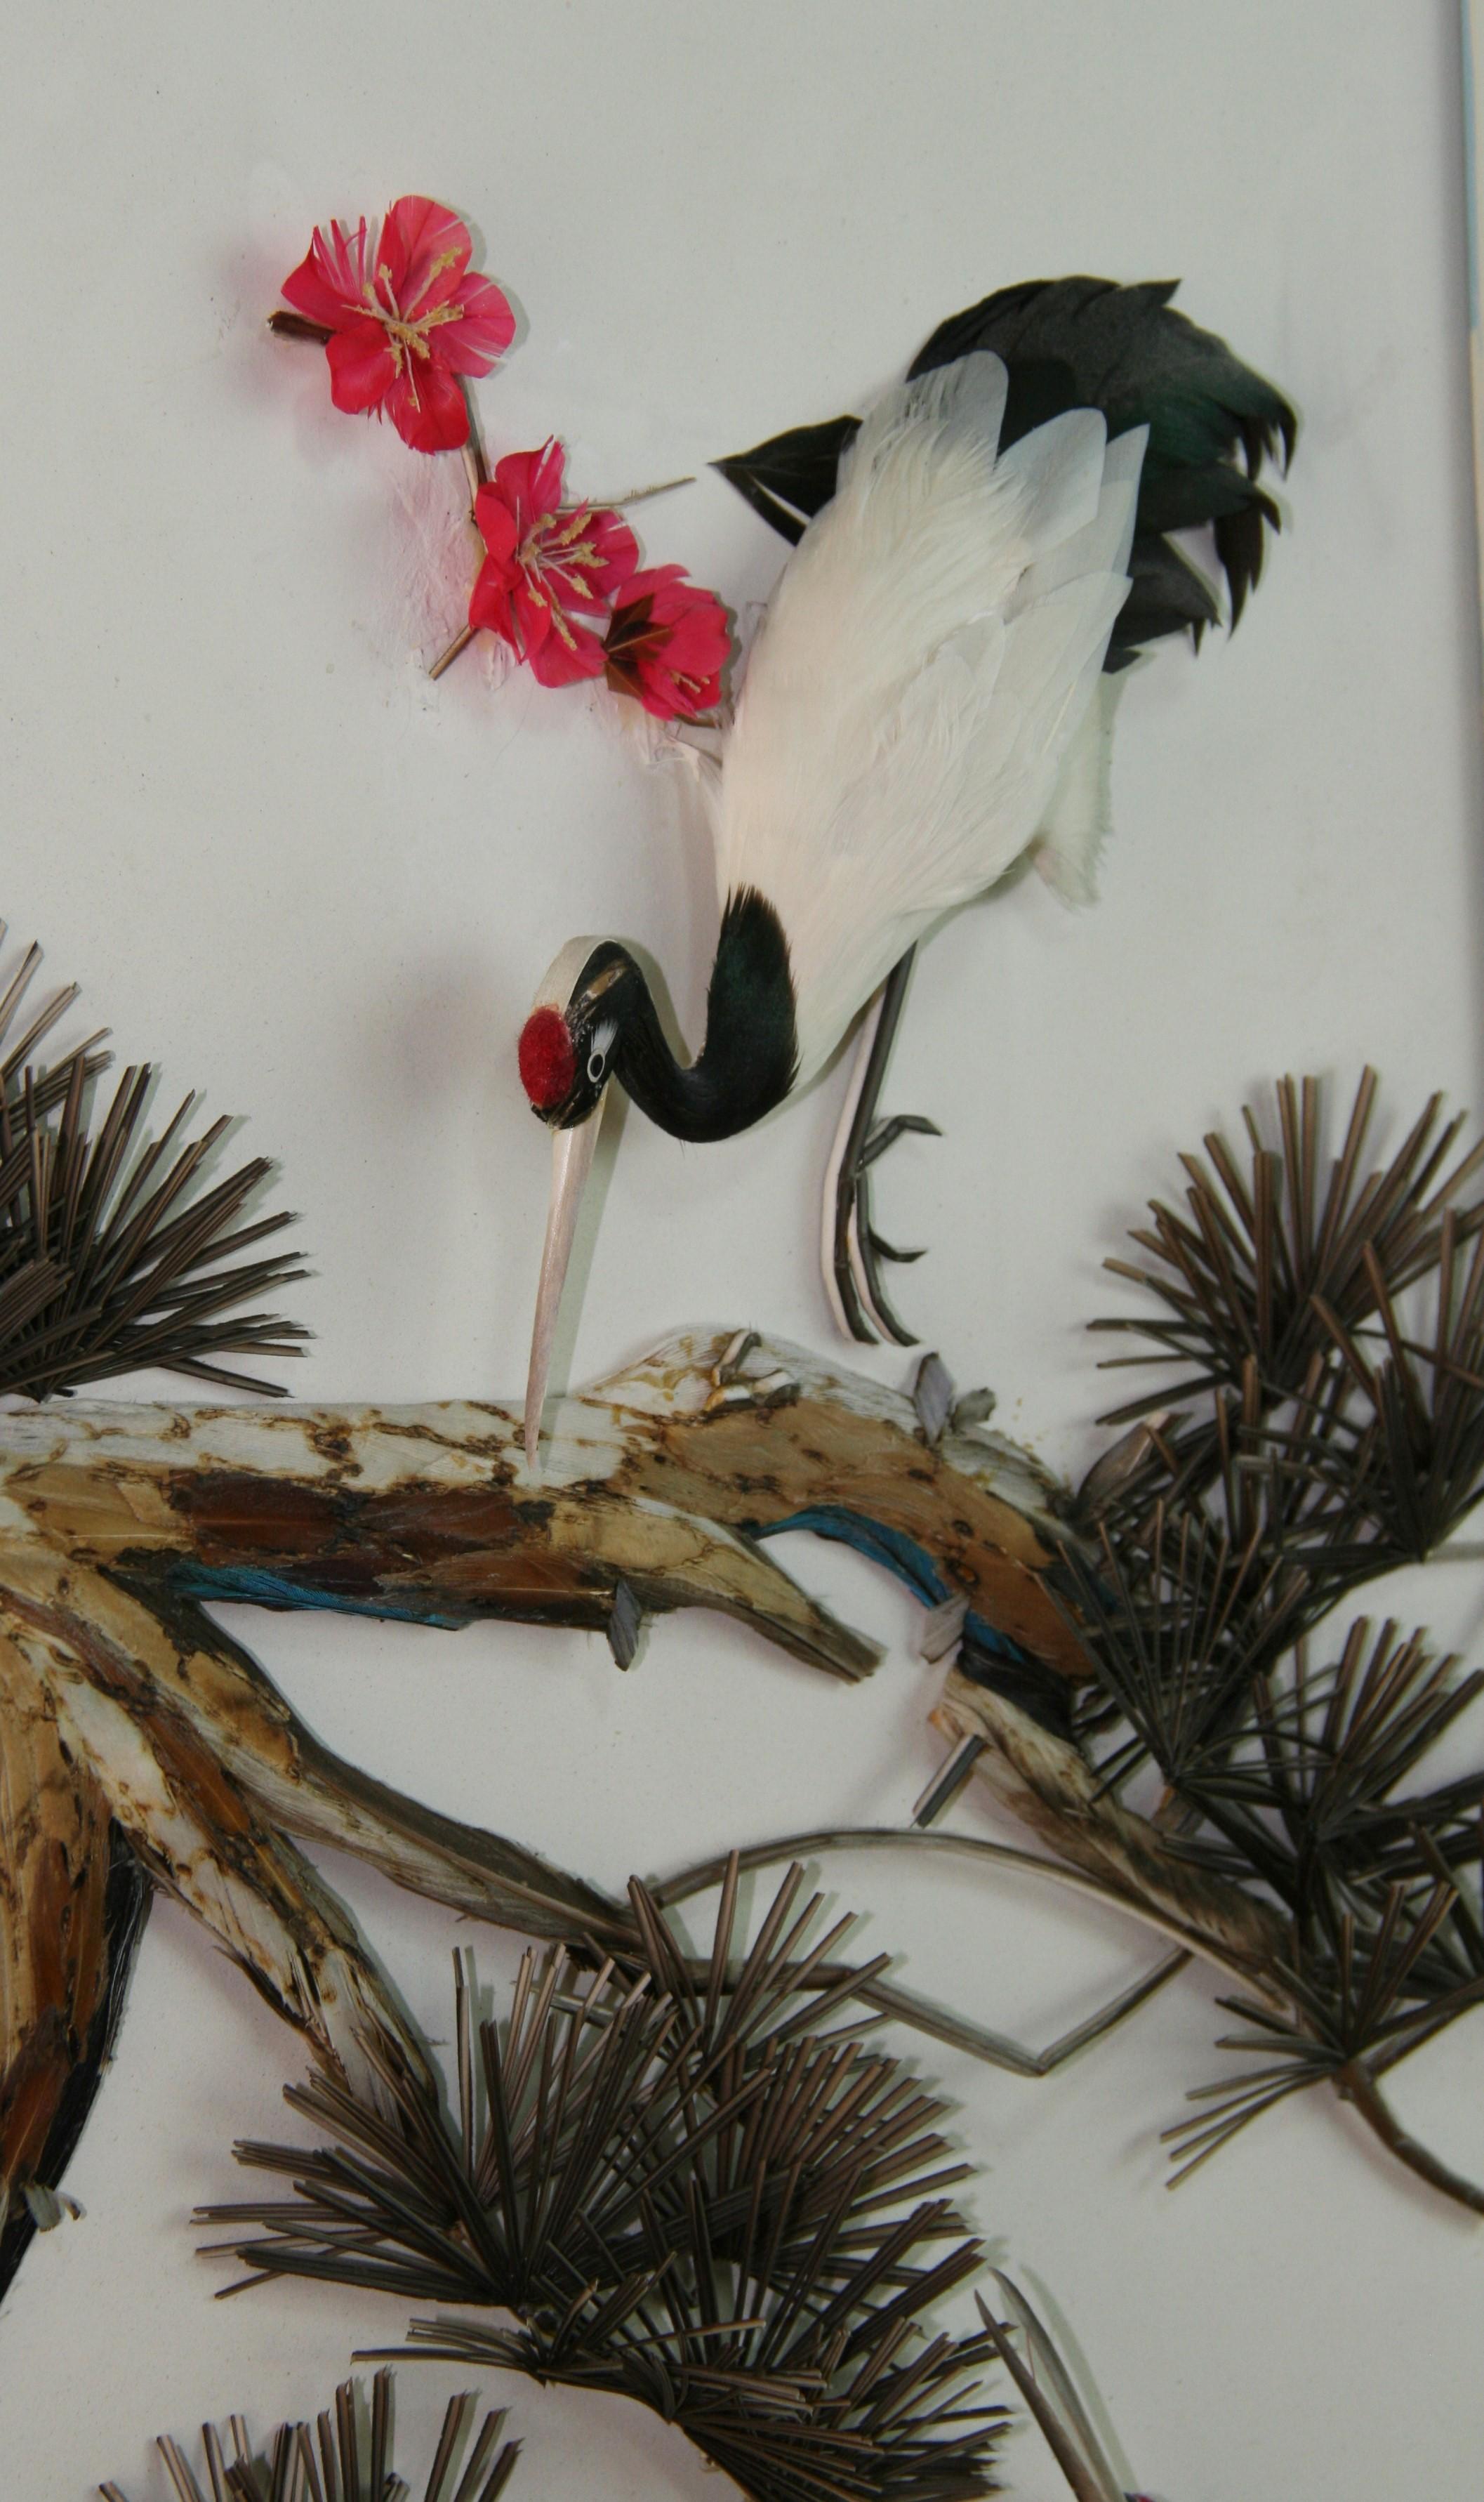 3-941 Hand made diorama using bird feathers and natural fauna set in a lacquered wood frame under glass.